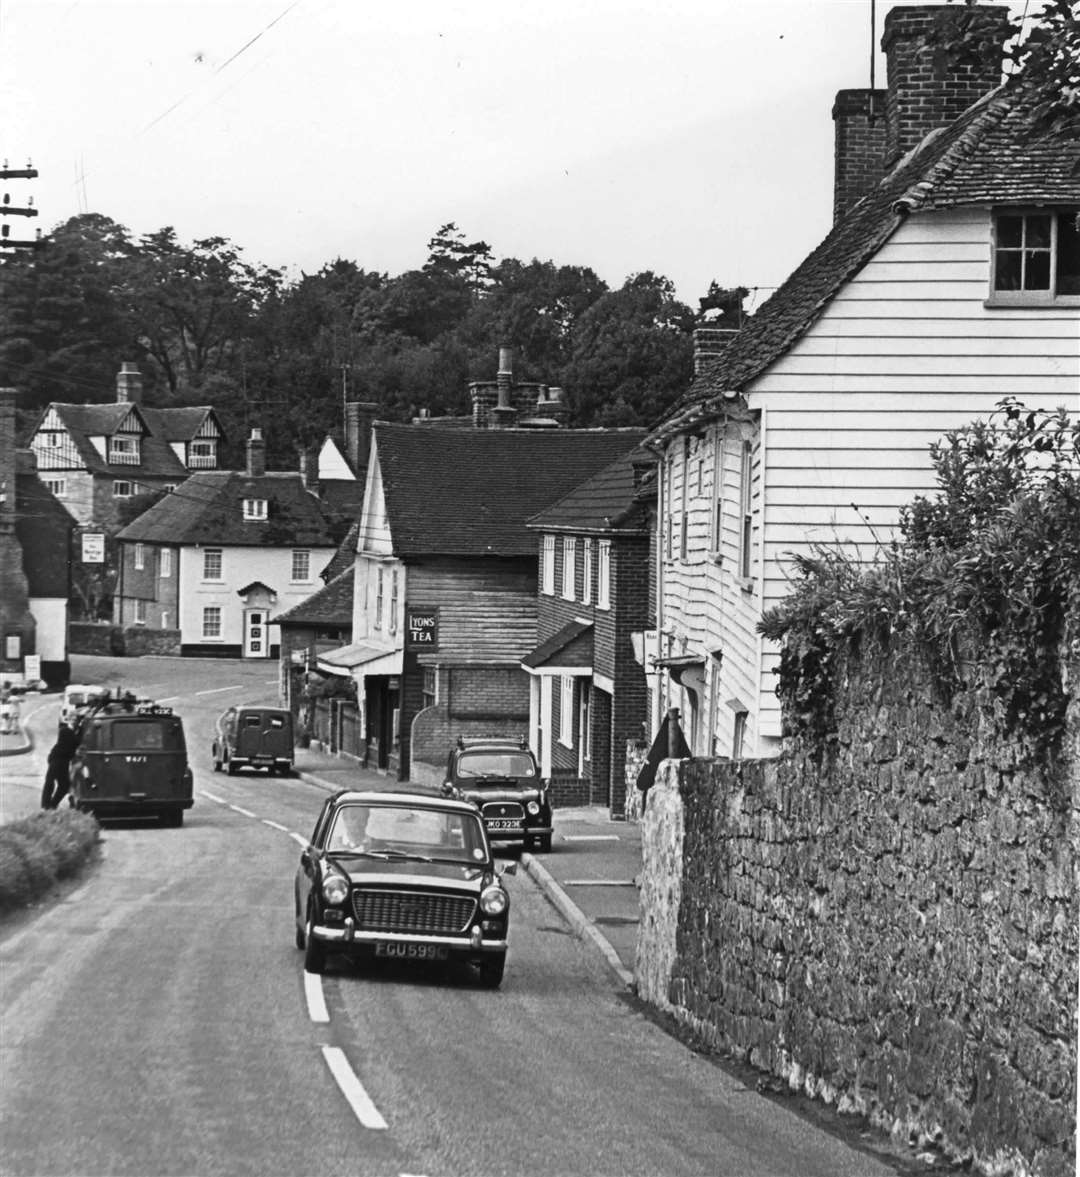 Leeds, near Maidstone, pictured in 1968